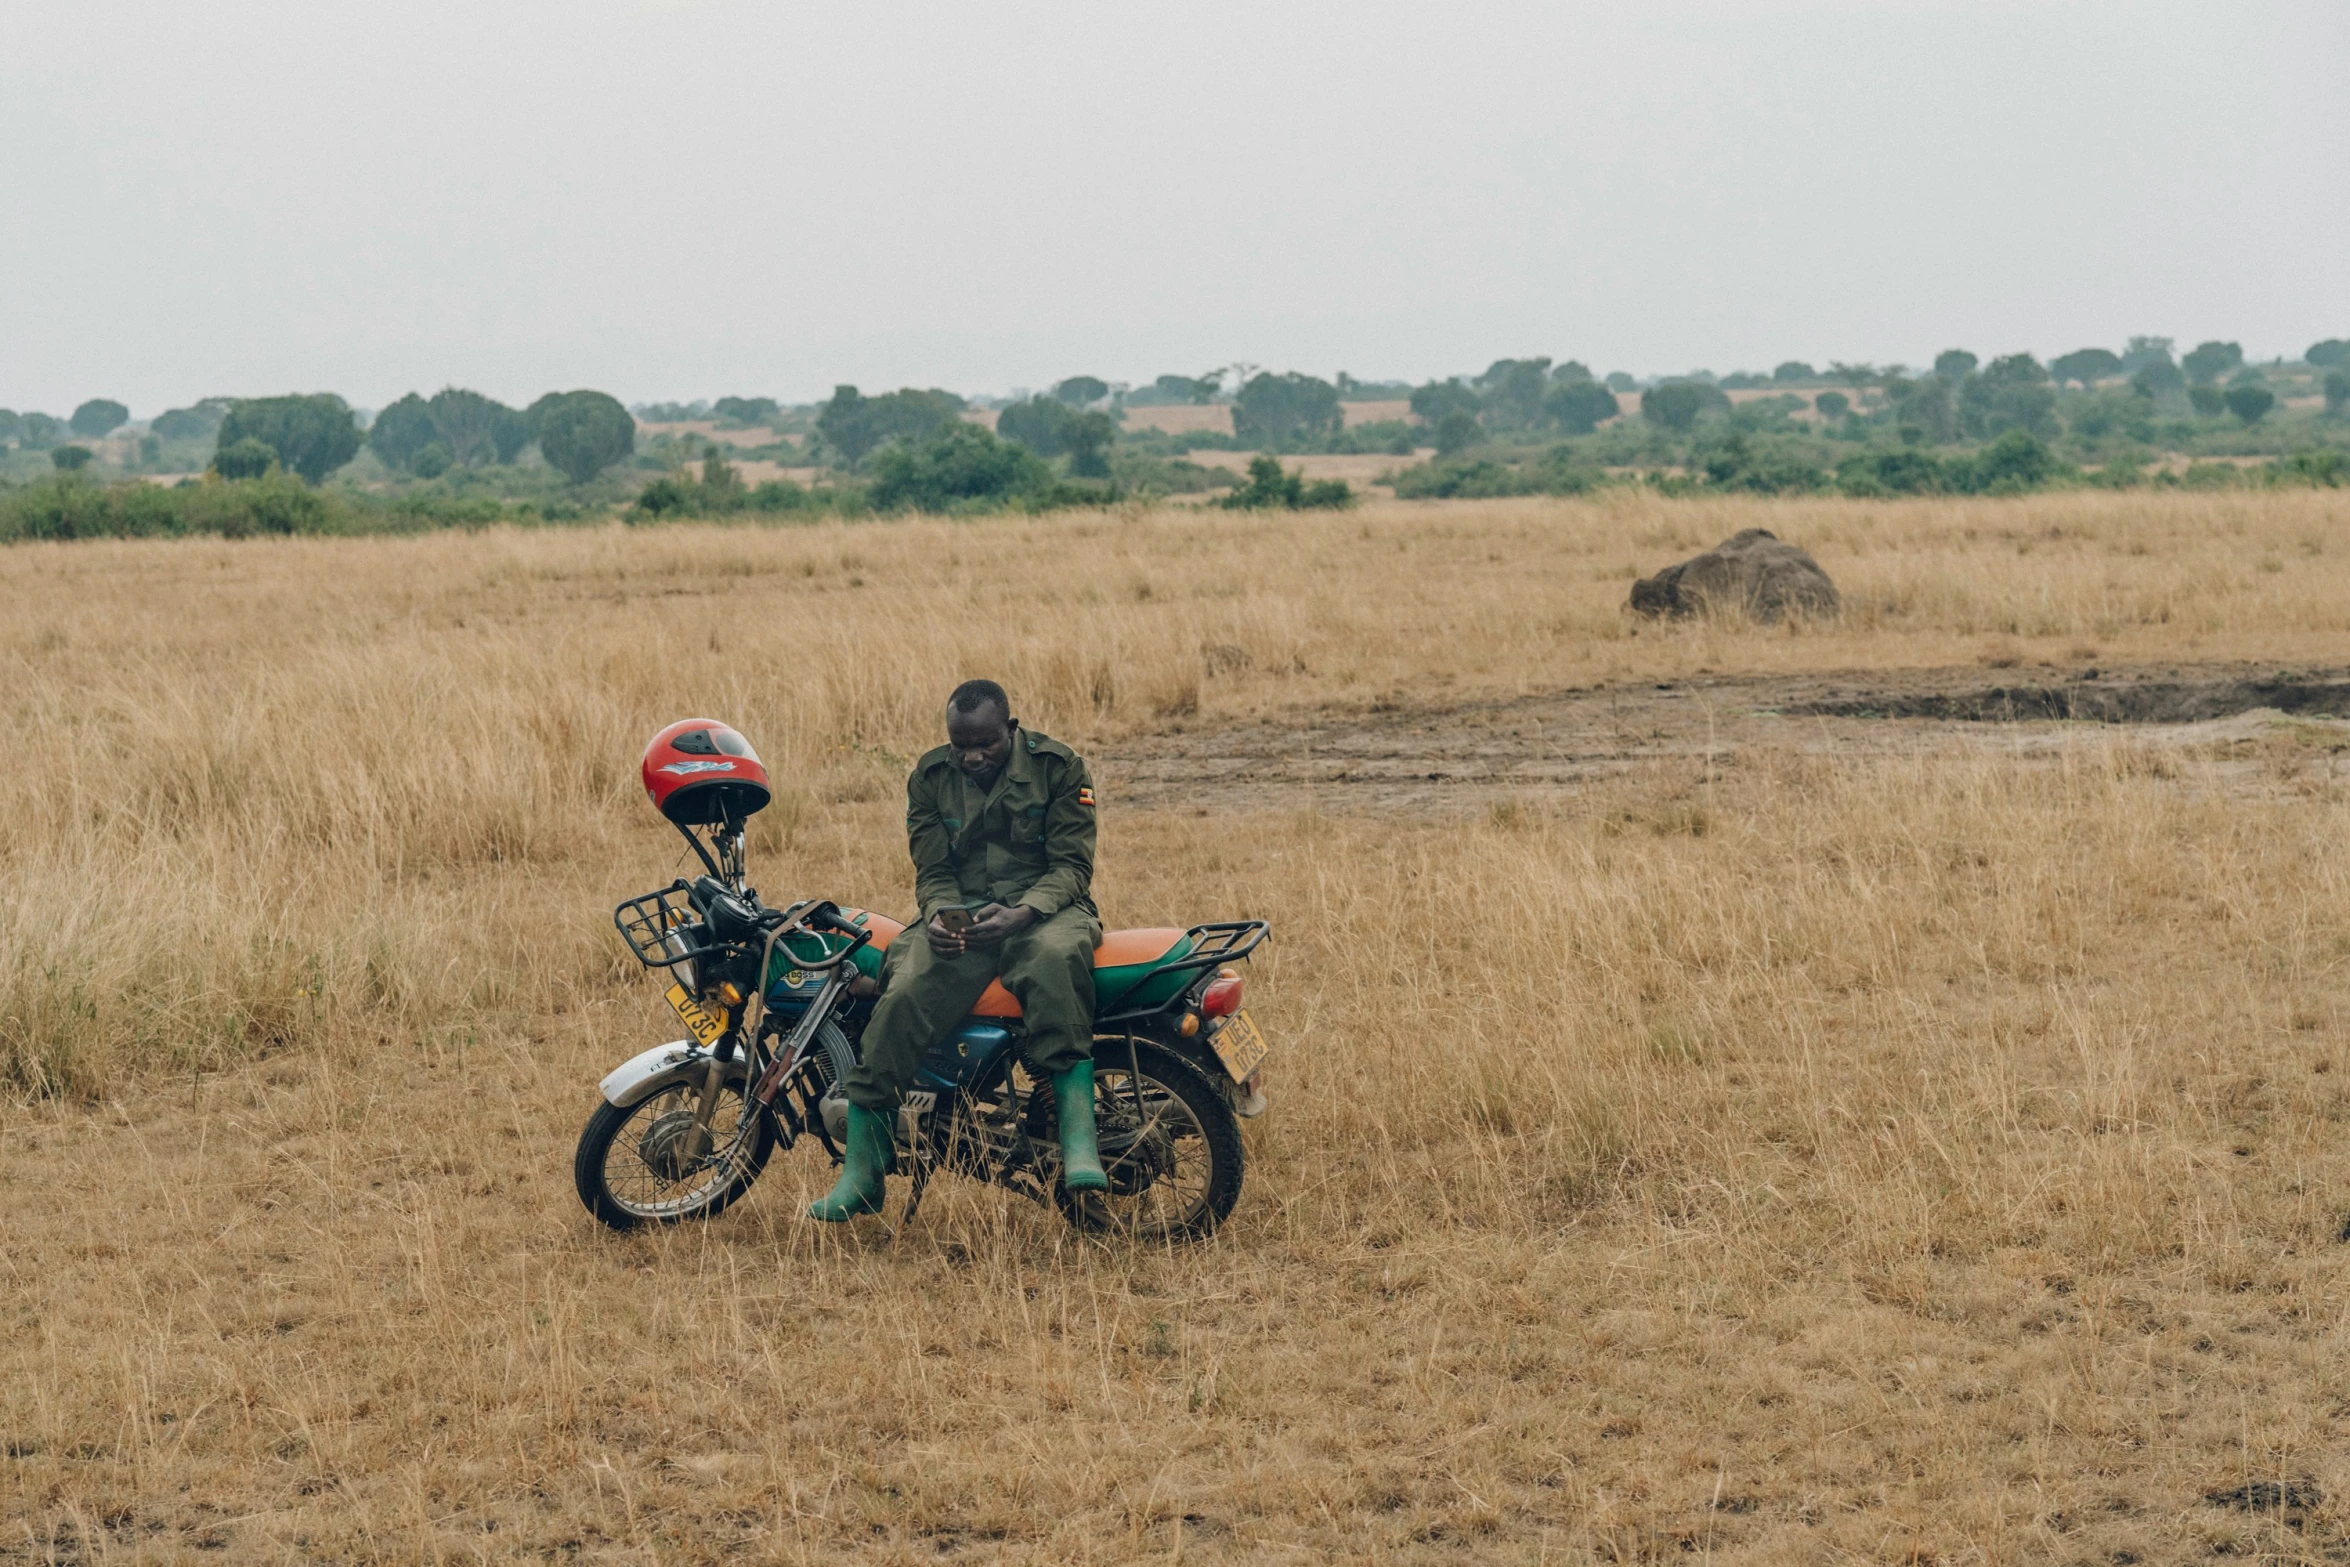 two people standing behind a motorcycle in a field